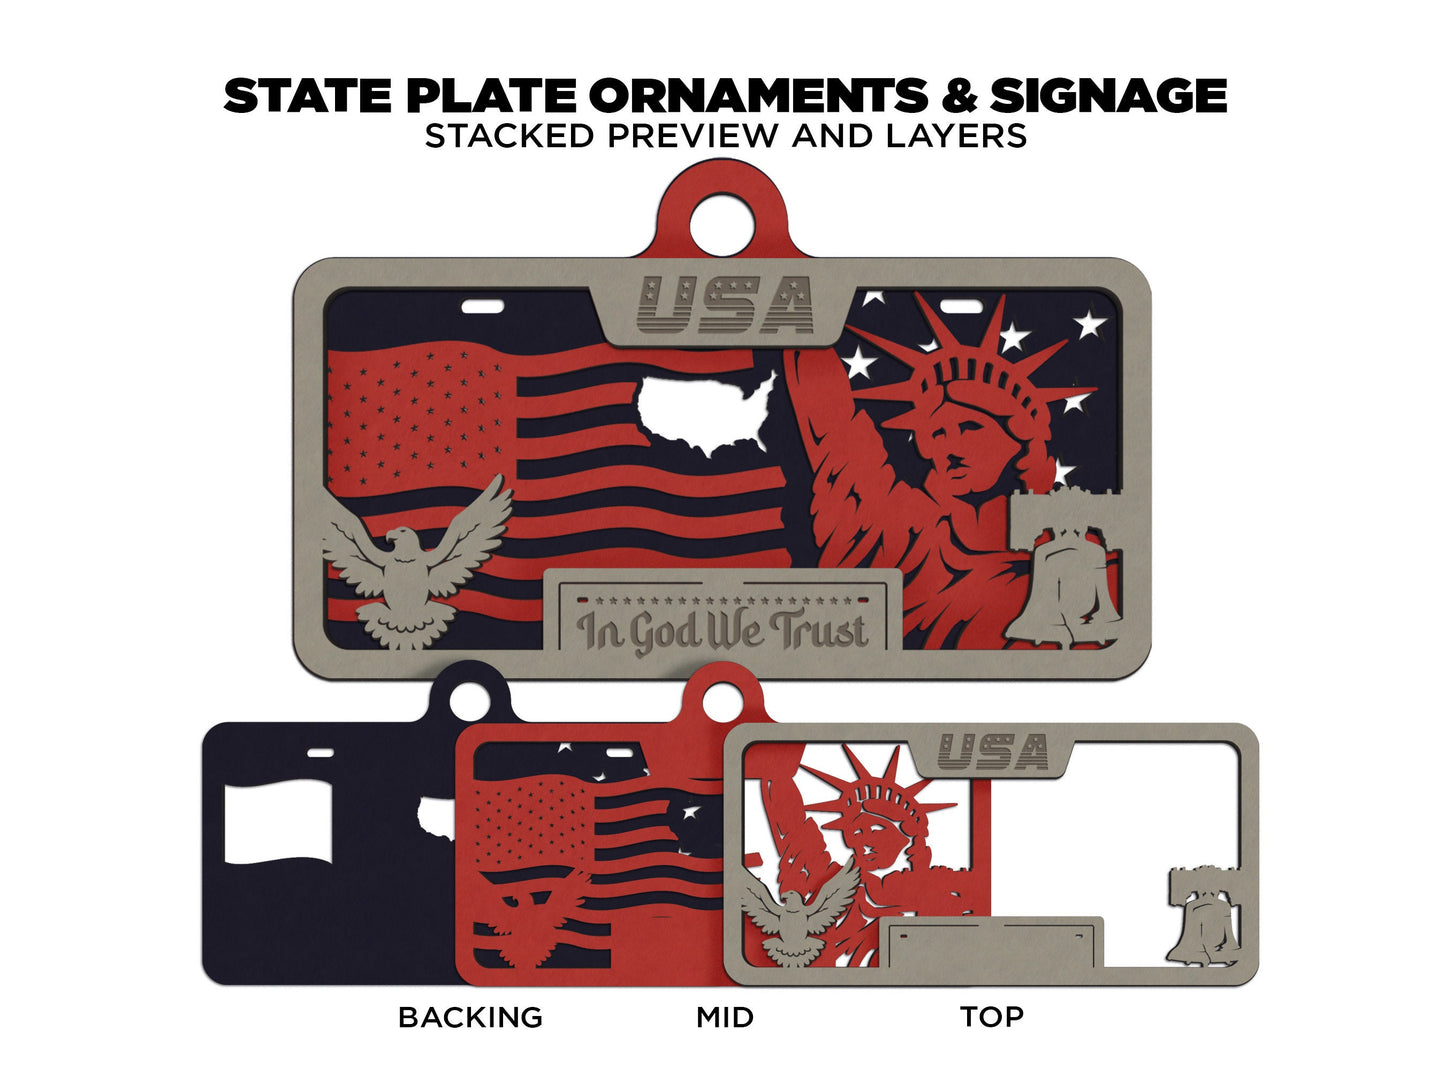 Arizona State Plate Ornament and Signage - SVG File Download - Sized for Glowforge - Laser Ready Digital Files